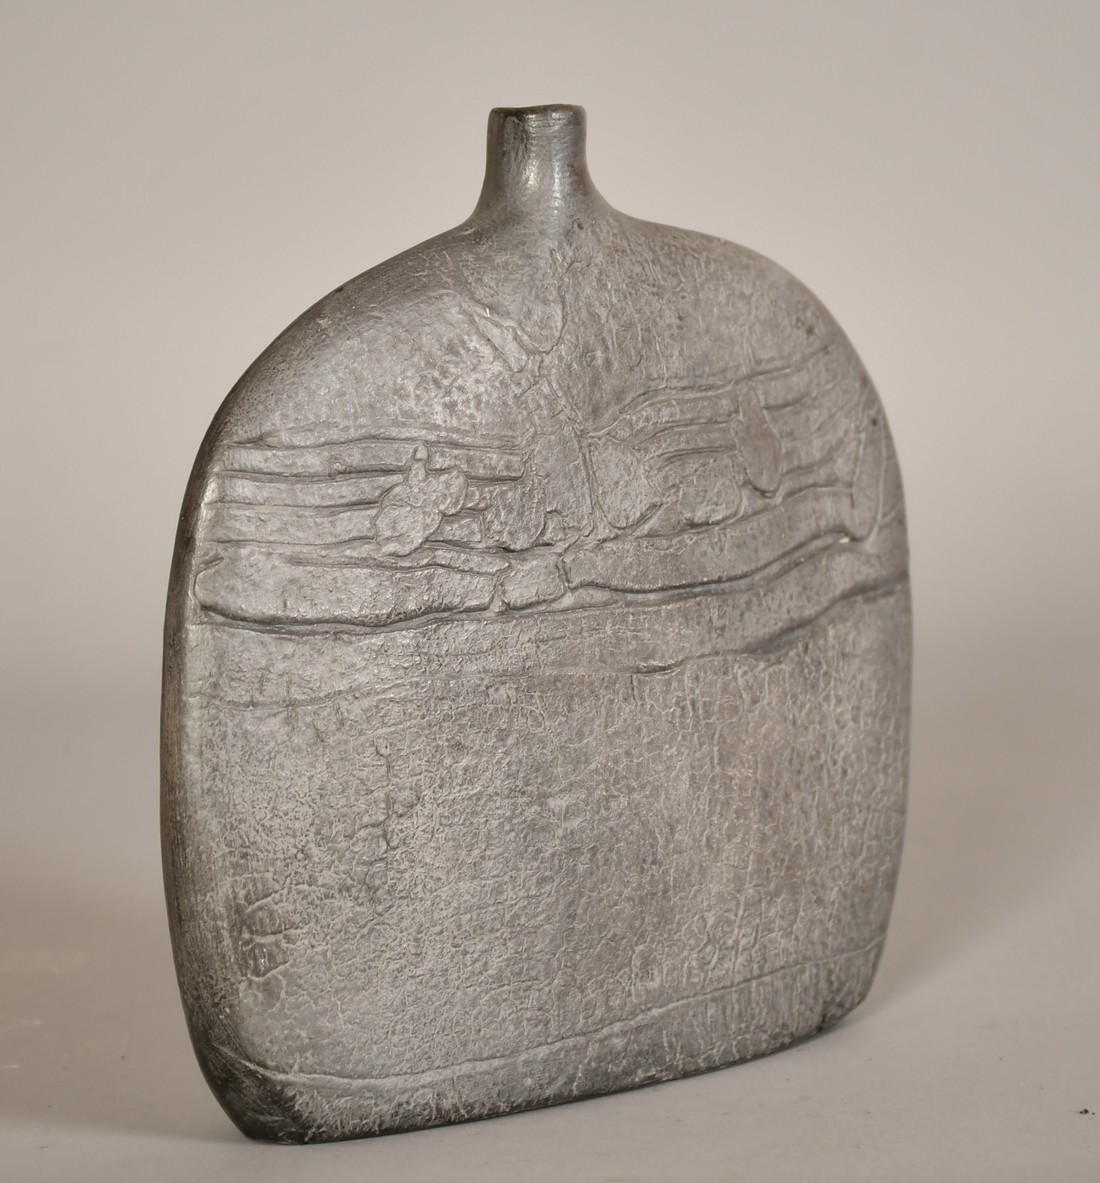 A studio pottery flattened vase with a textured metallic style finish, 7" (18cm) high. - Image 2 of 4